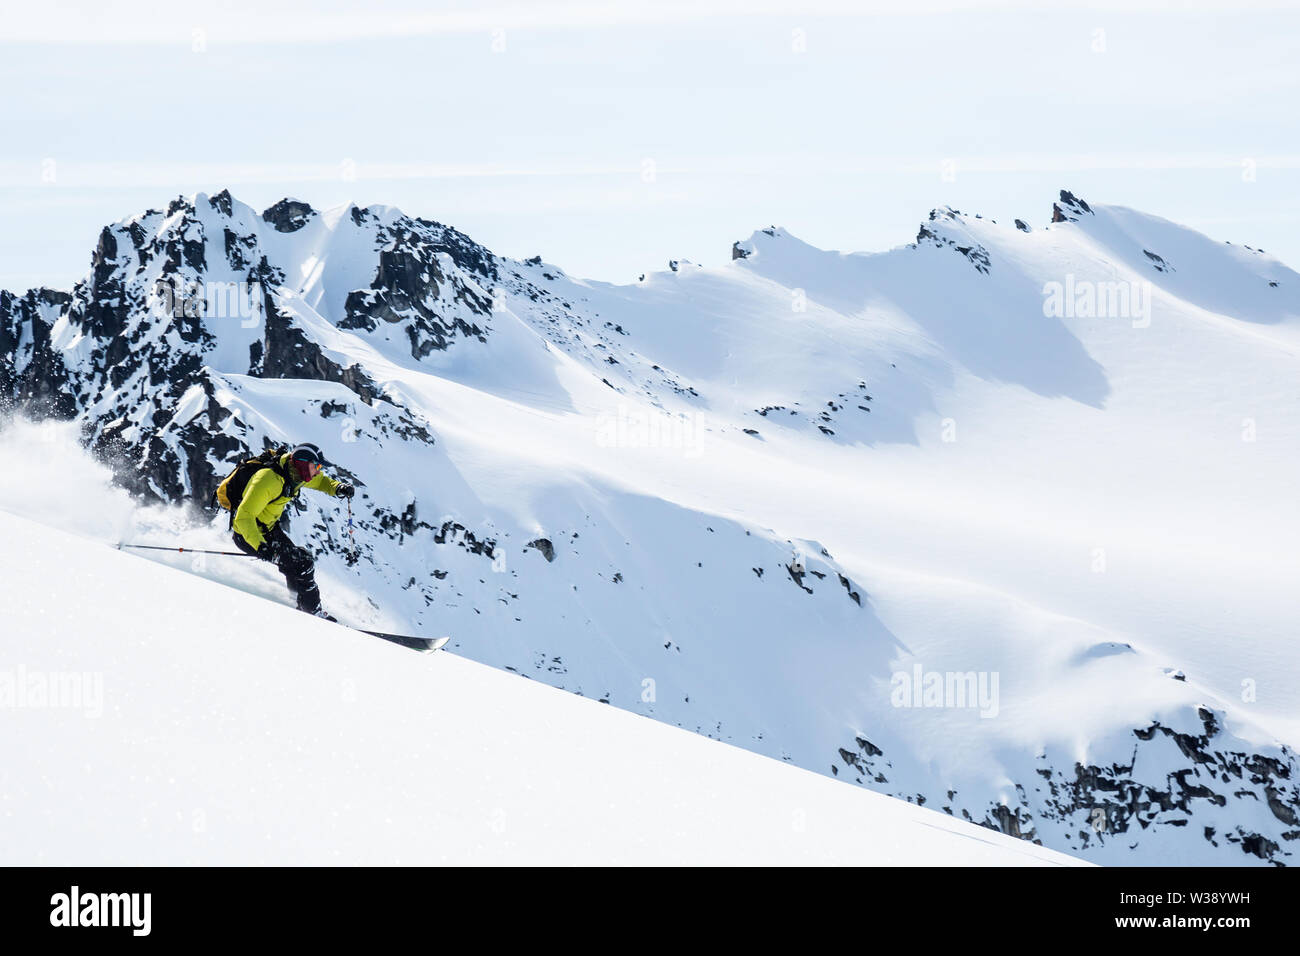 Backcountry skier on remote Alaskan peaks in the Talkeetna Mountains. Large, snowy peaks in the Stock Photo